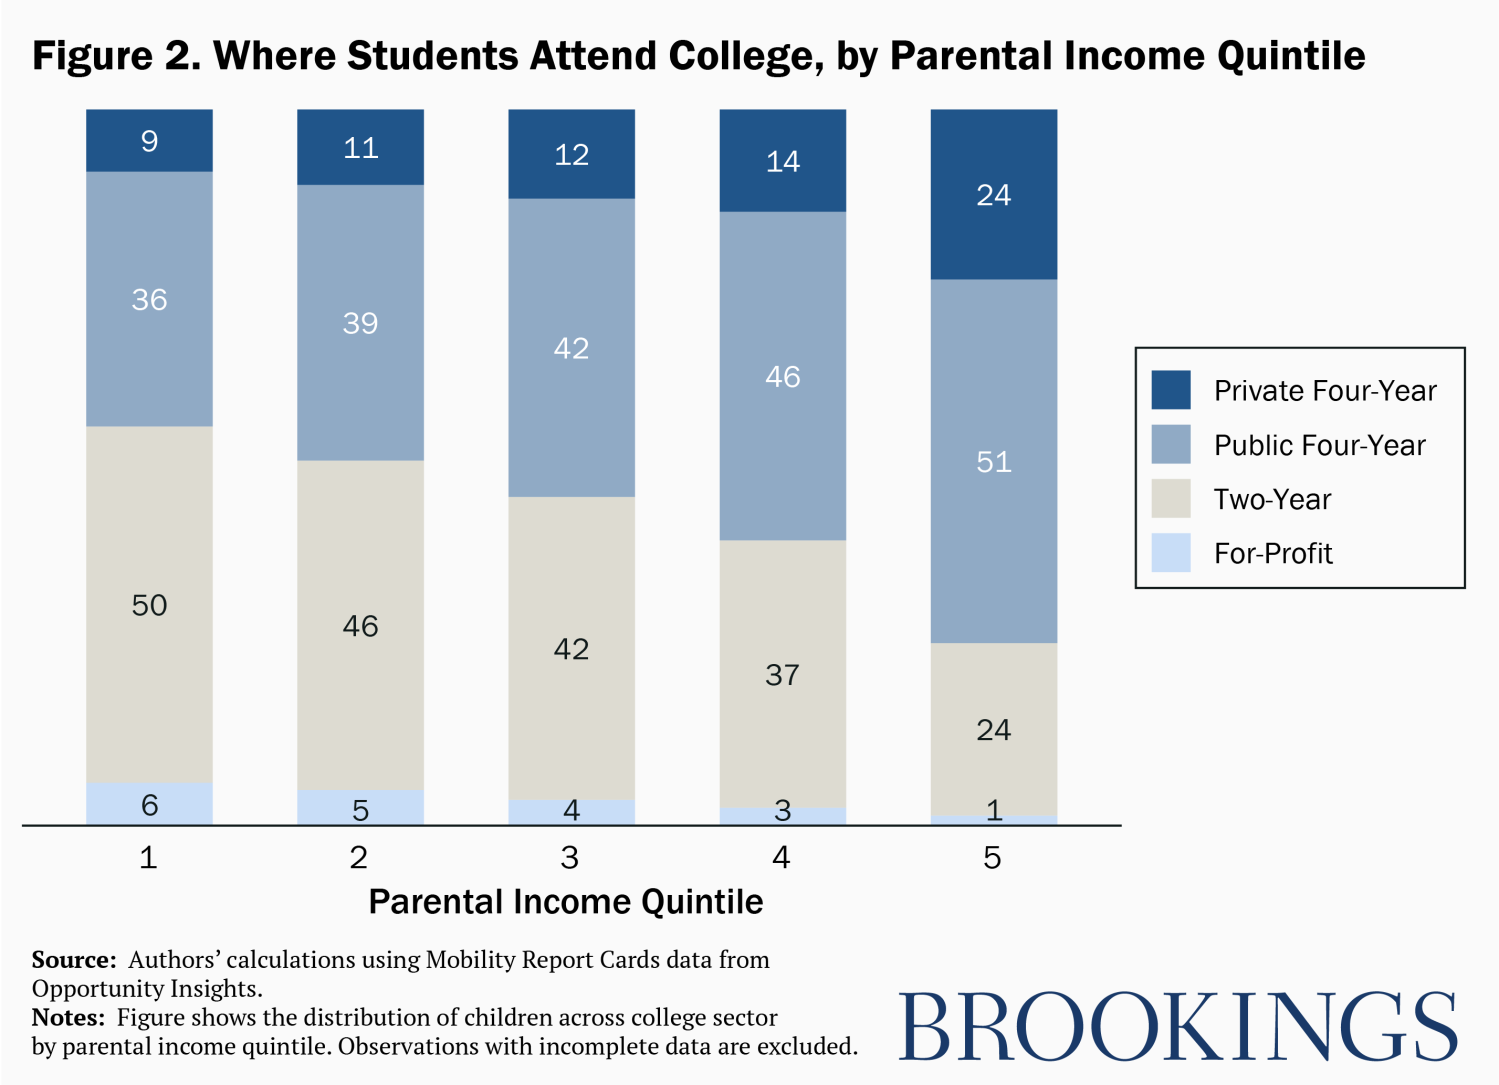 Where students attend college, by parental income quintile